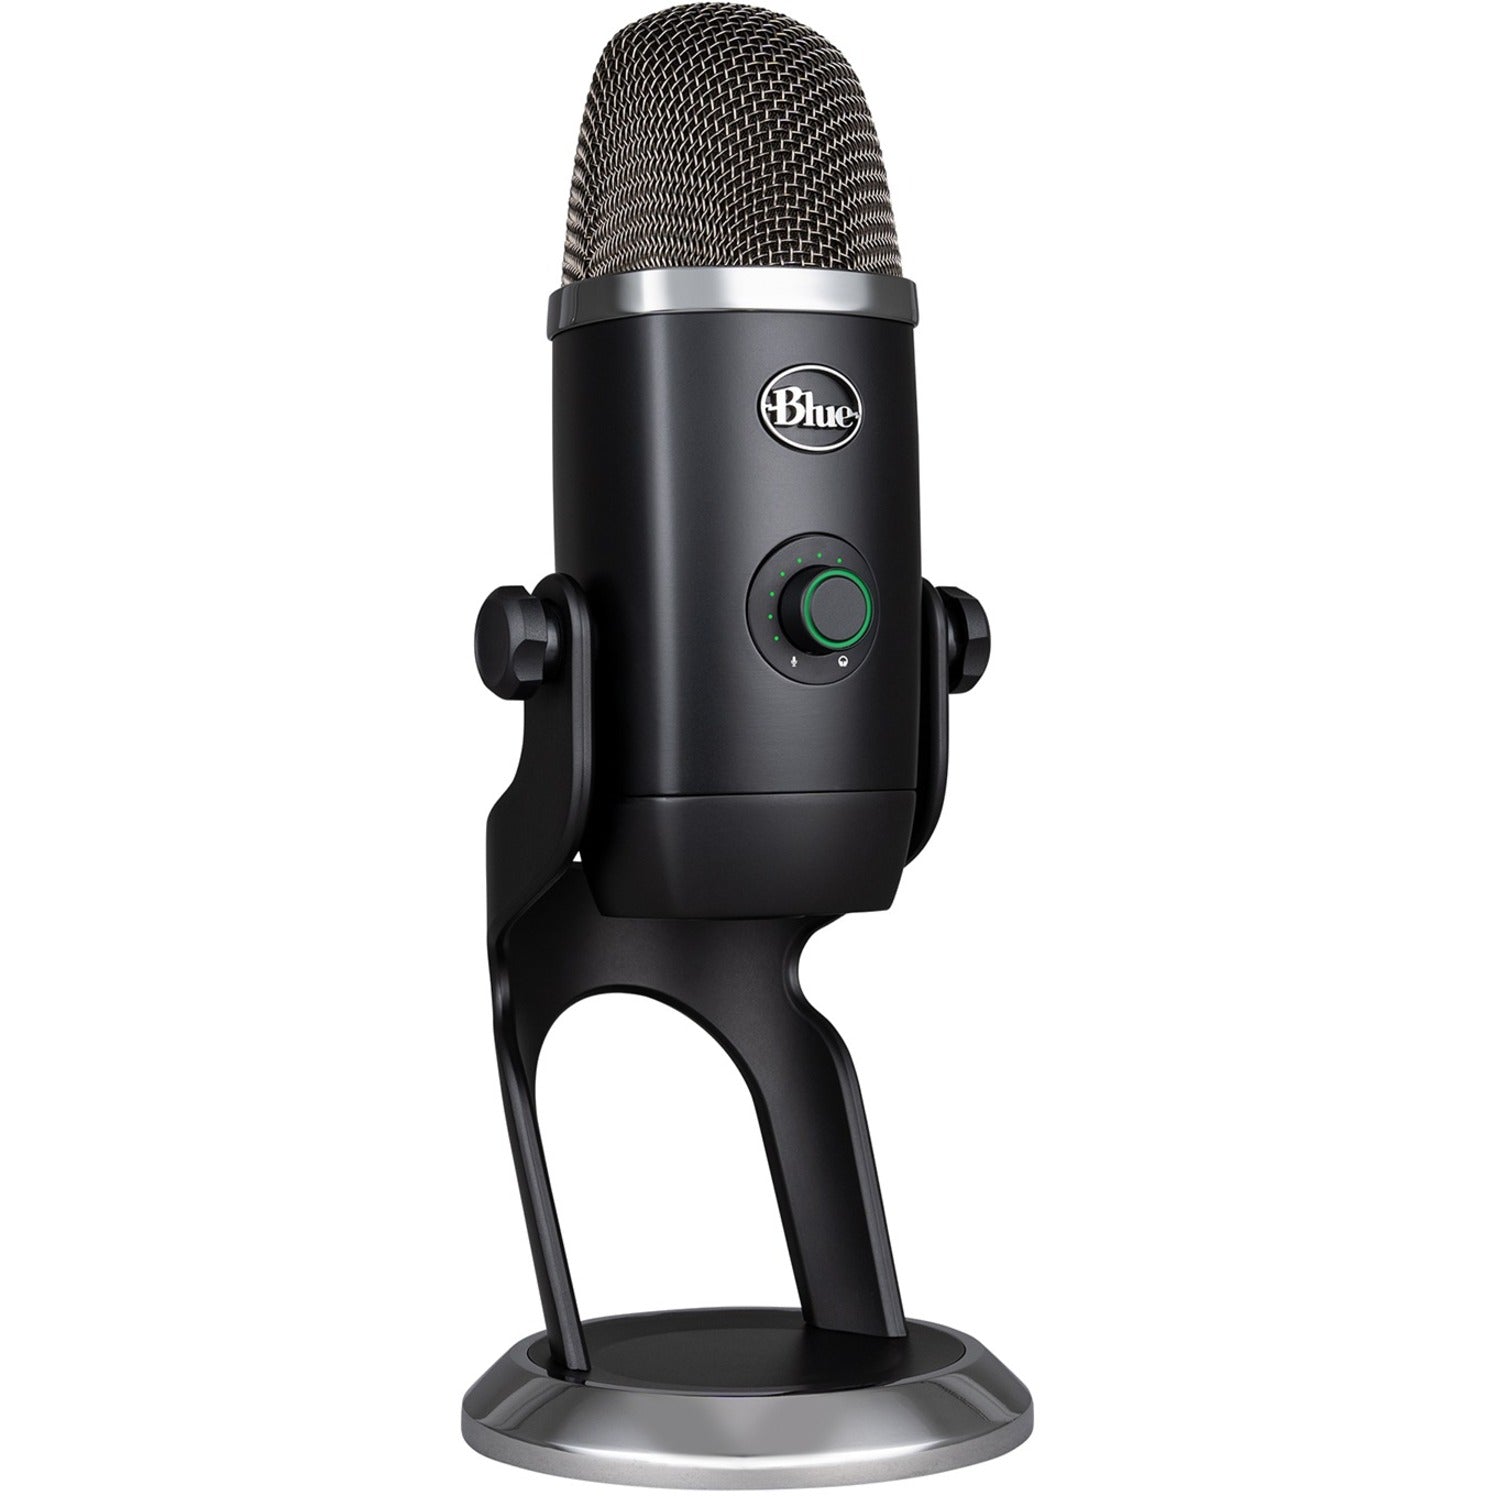 Blue 988-000105 Yeti X Professional USB Microphone for Gaming, Streaming and Podcasting, 2 Year Warranty, Stand Mountable/Desktop, Condenser